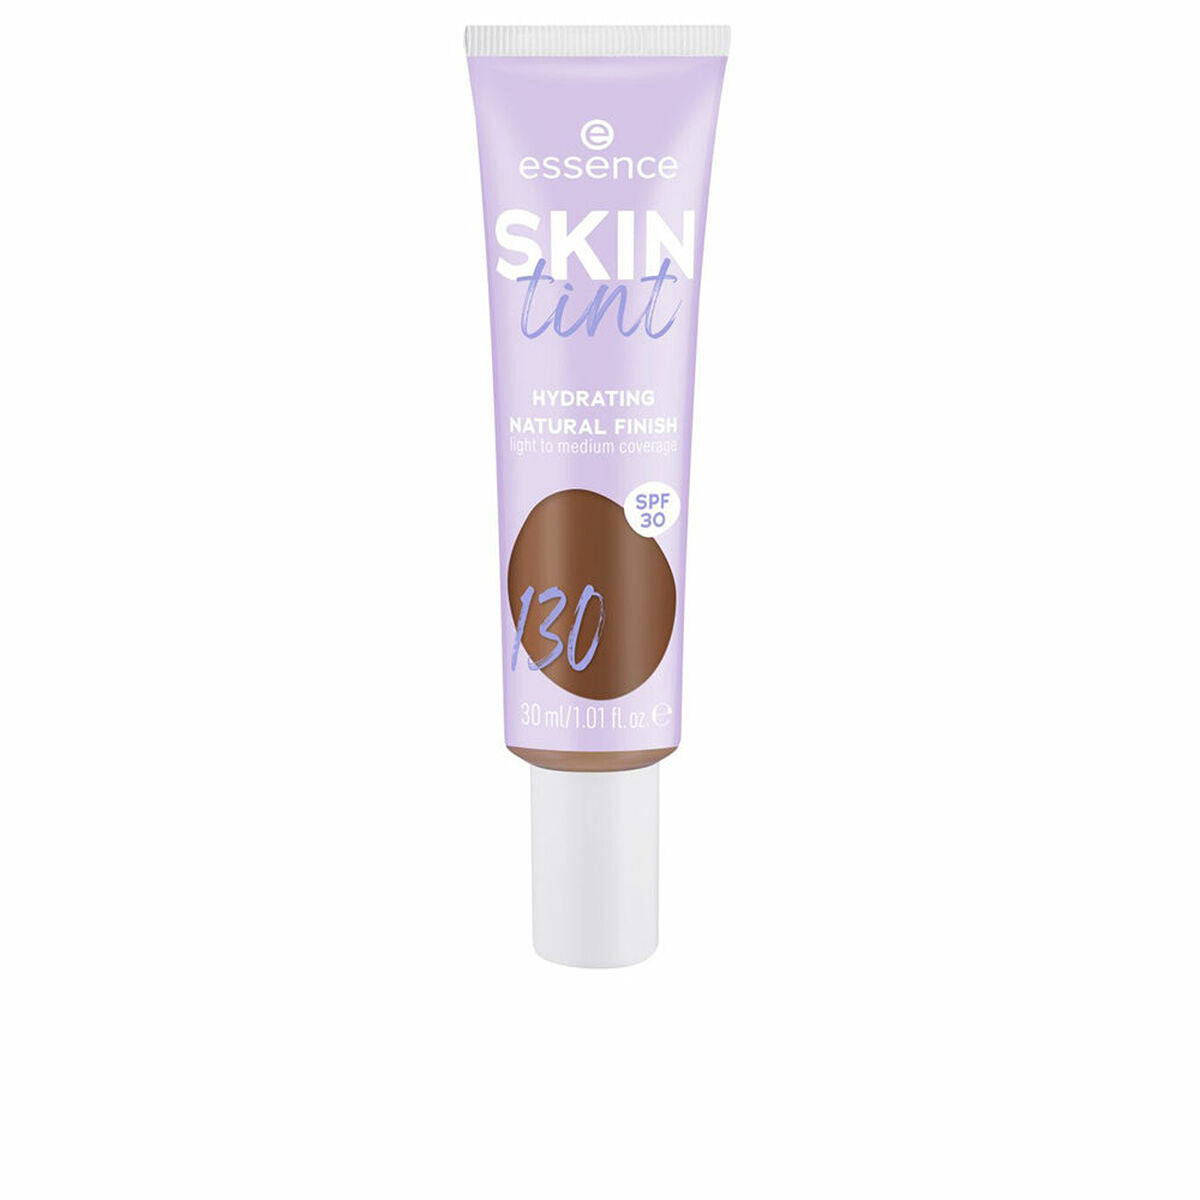 Hydrating Cream with Colour Essence SKIN TINT Nº 130 Spf 30 30 ml